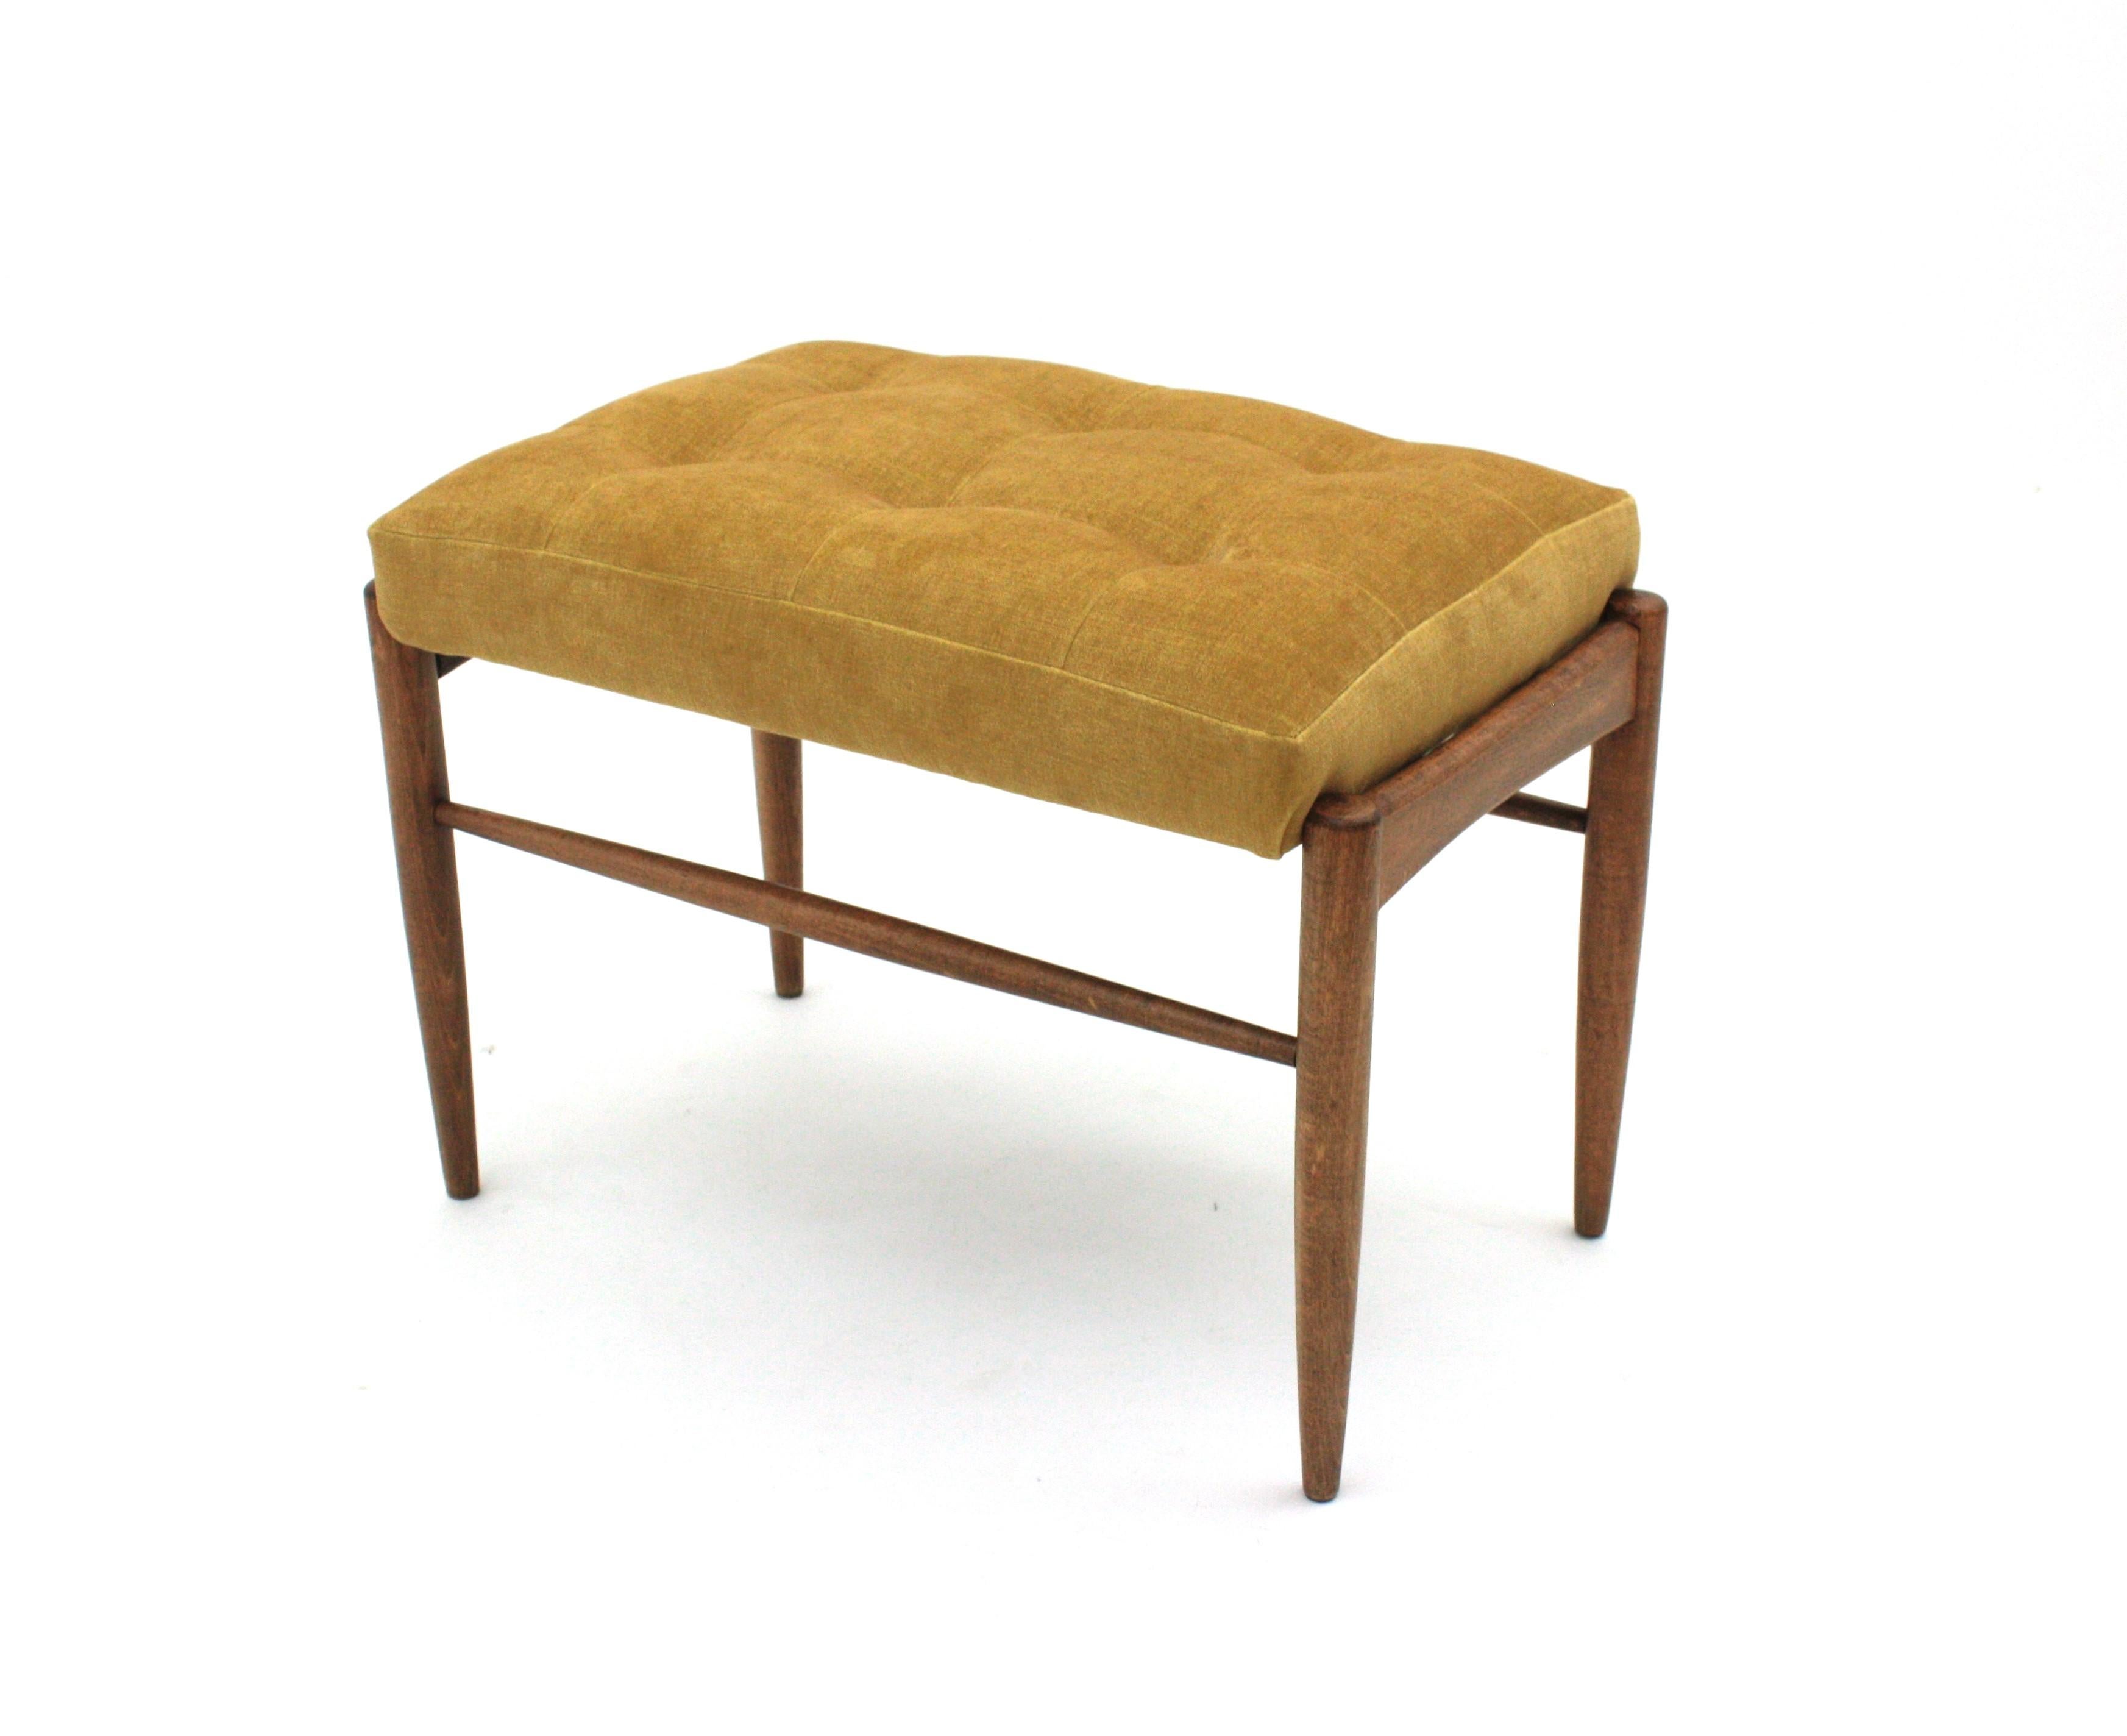 Scandinavian Modern Stool Ottoman or Bench New Upholstered in Yellow Chenille For Sale 2